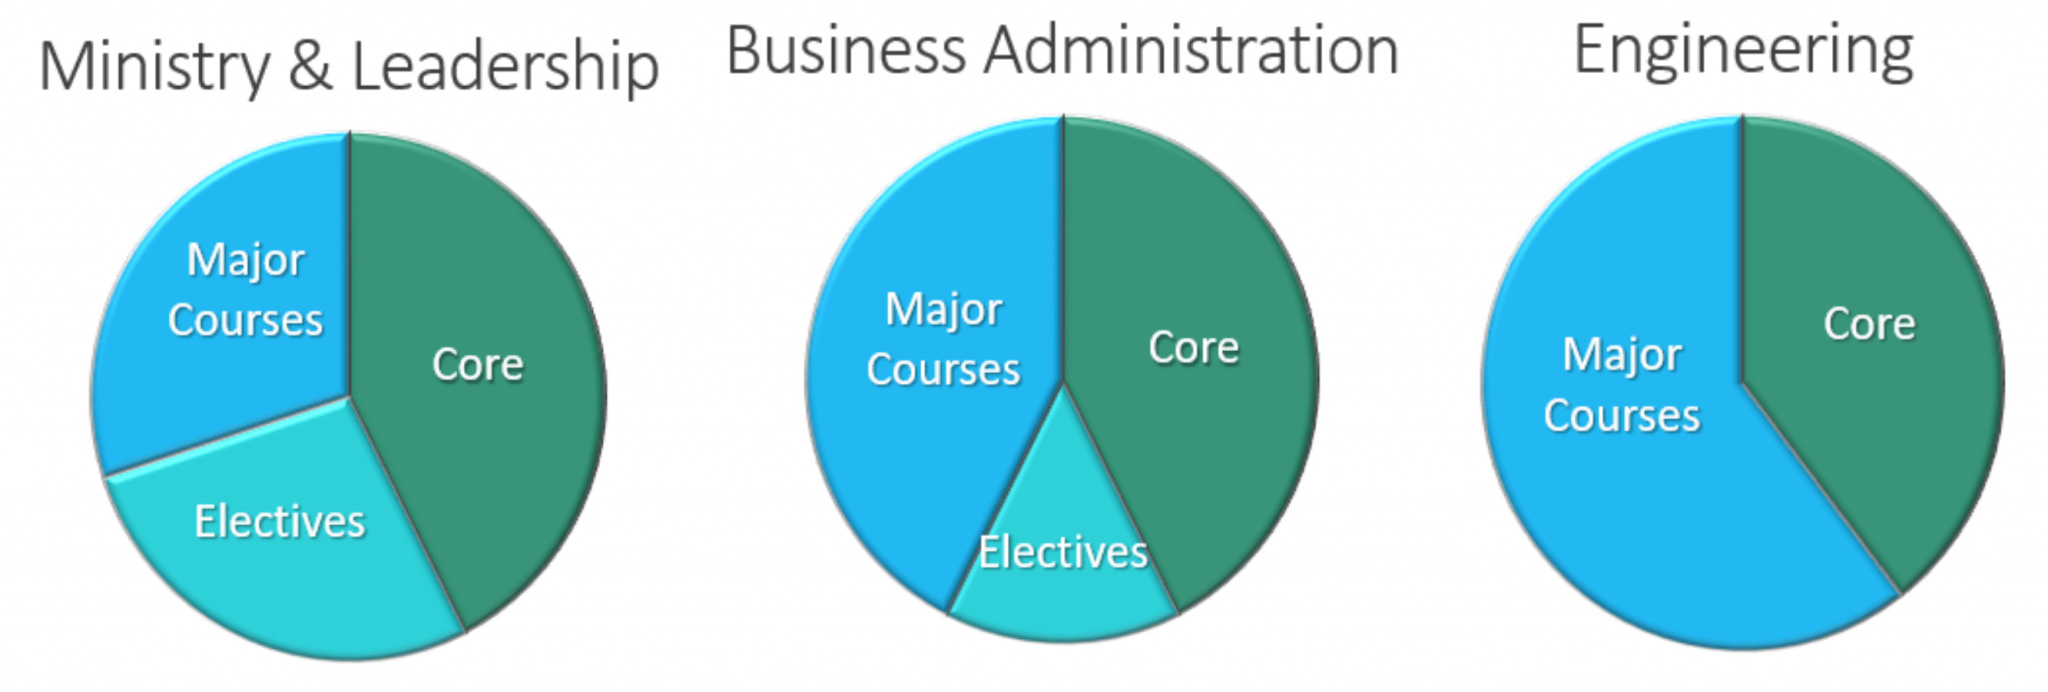 Three pie charts illustrating the differences between ministry and leadership, business administration, and engineering